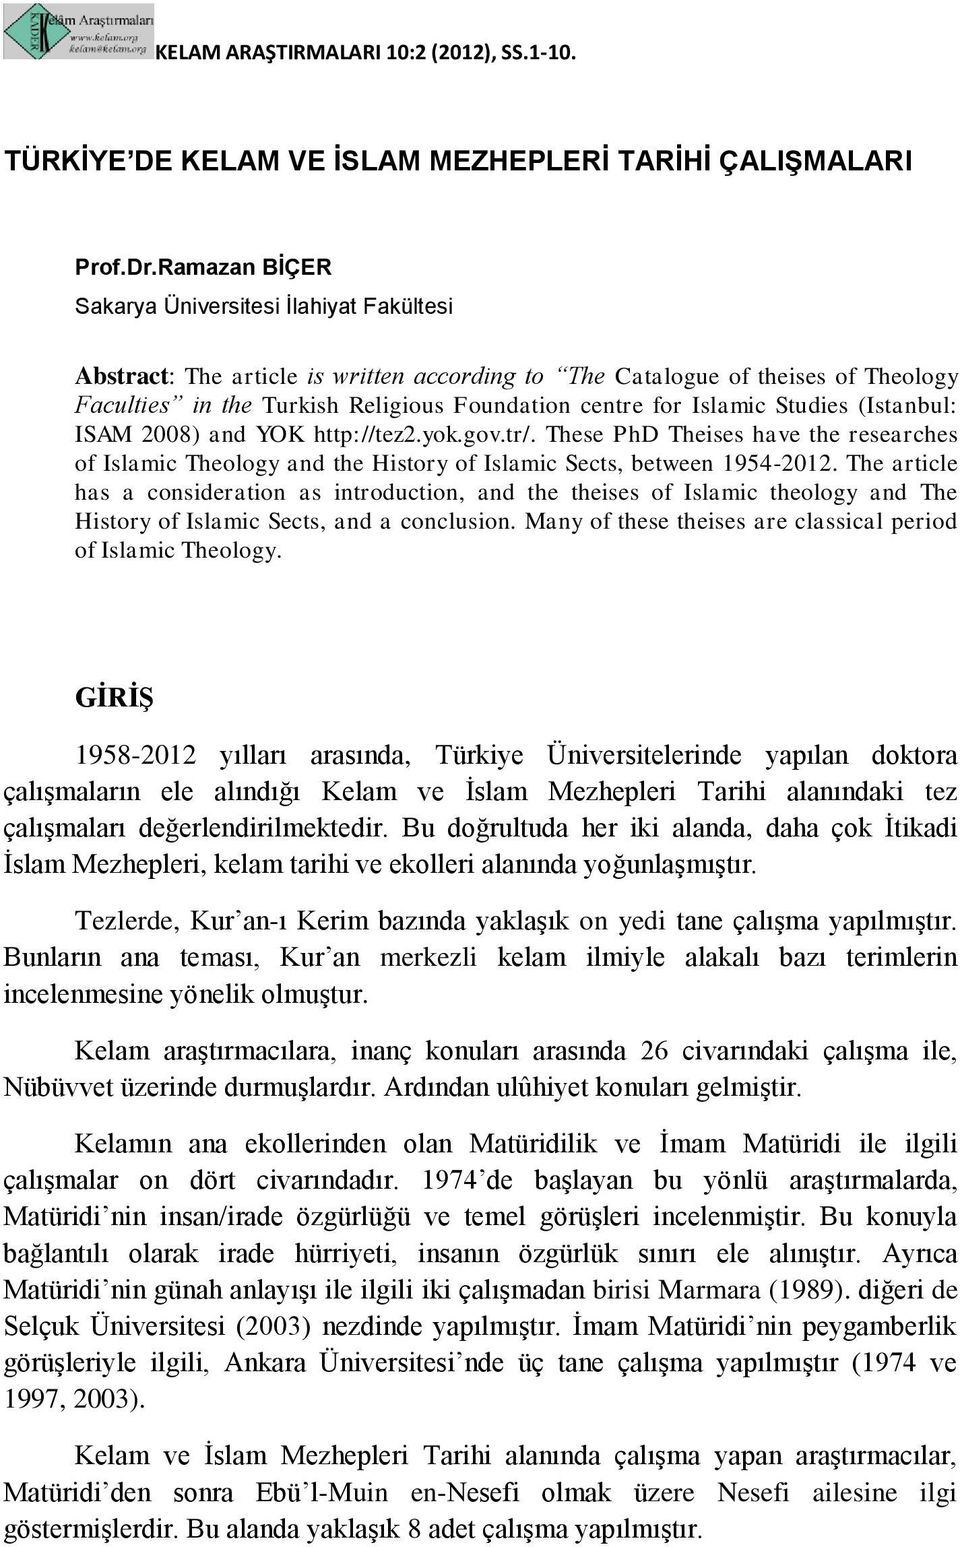 Islamic Studies (Istanbul: ISAM 2008) and YOK http://tez2.yok.gov.tr/. These PhD Theises have the researches of Islamic Theology and the History of Islamic Sects, between 1954-2012.